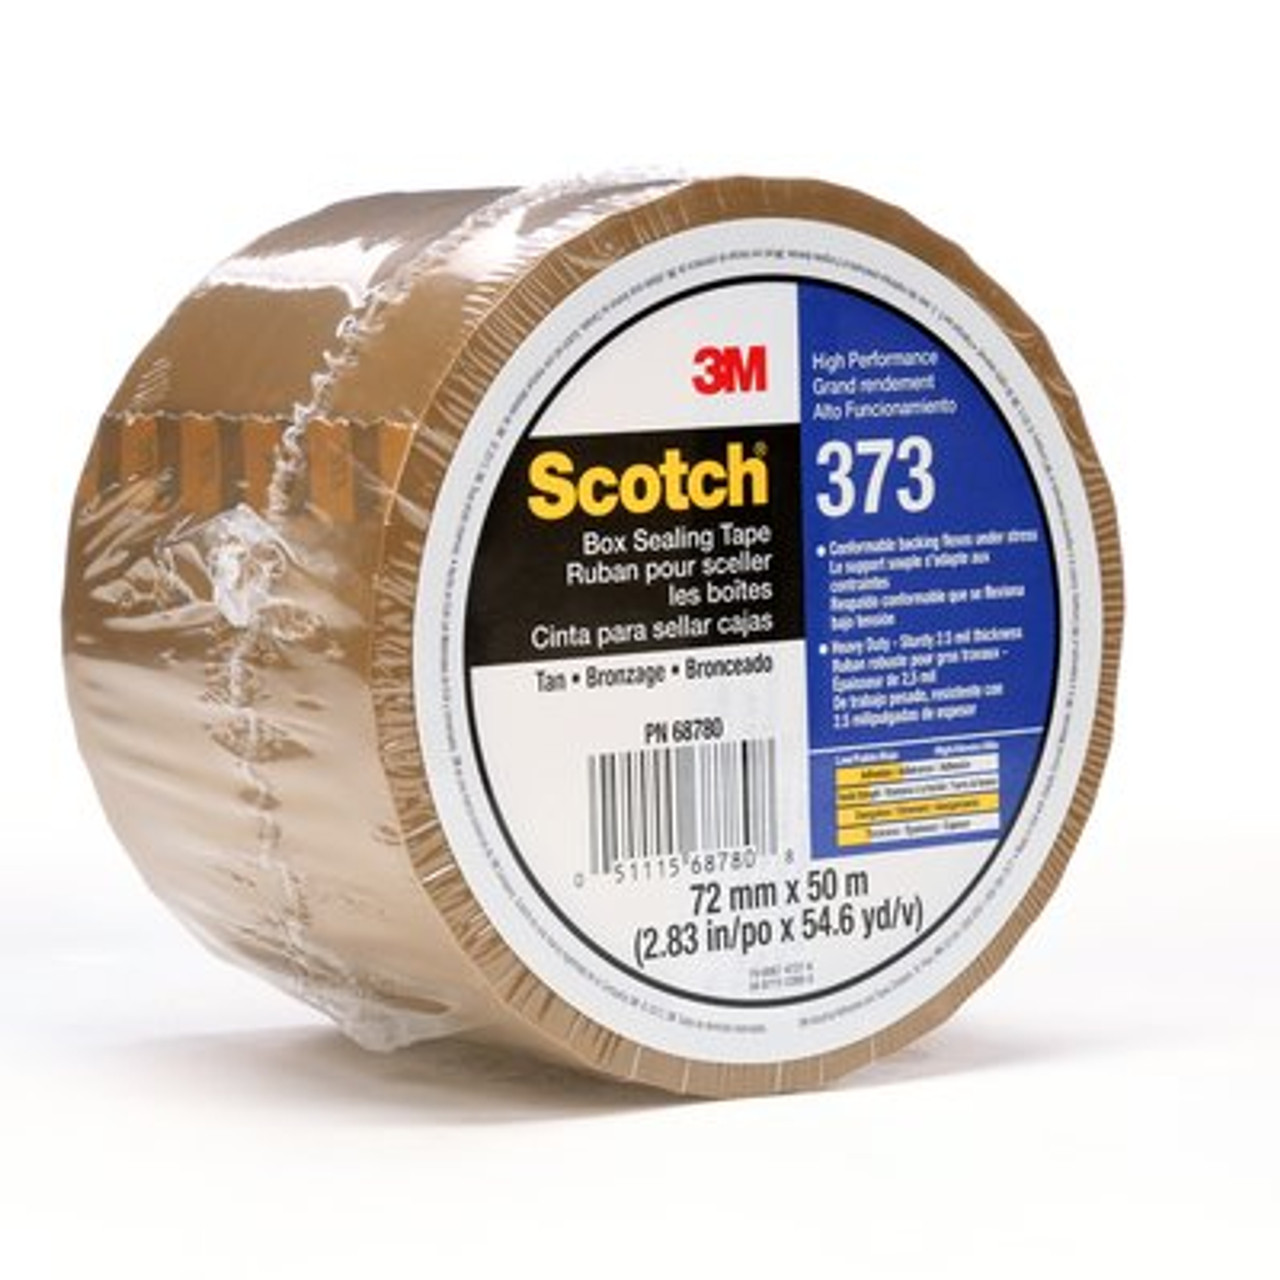 Scotch® High Performance Box Sealing Tape 373 Tan, (3") 72 mm x 50 m, 24 Individually Wrapped Rolls Per Case, Conveniently Packaged